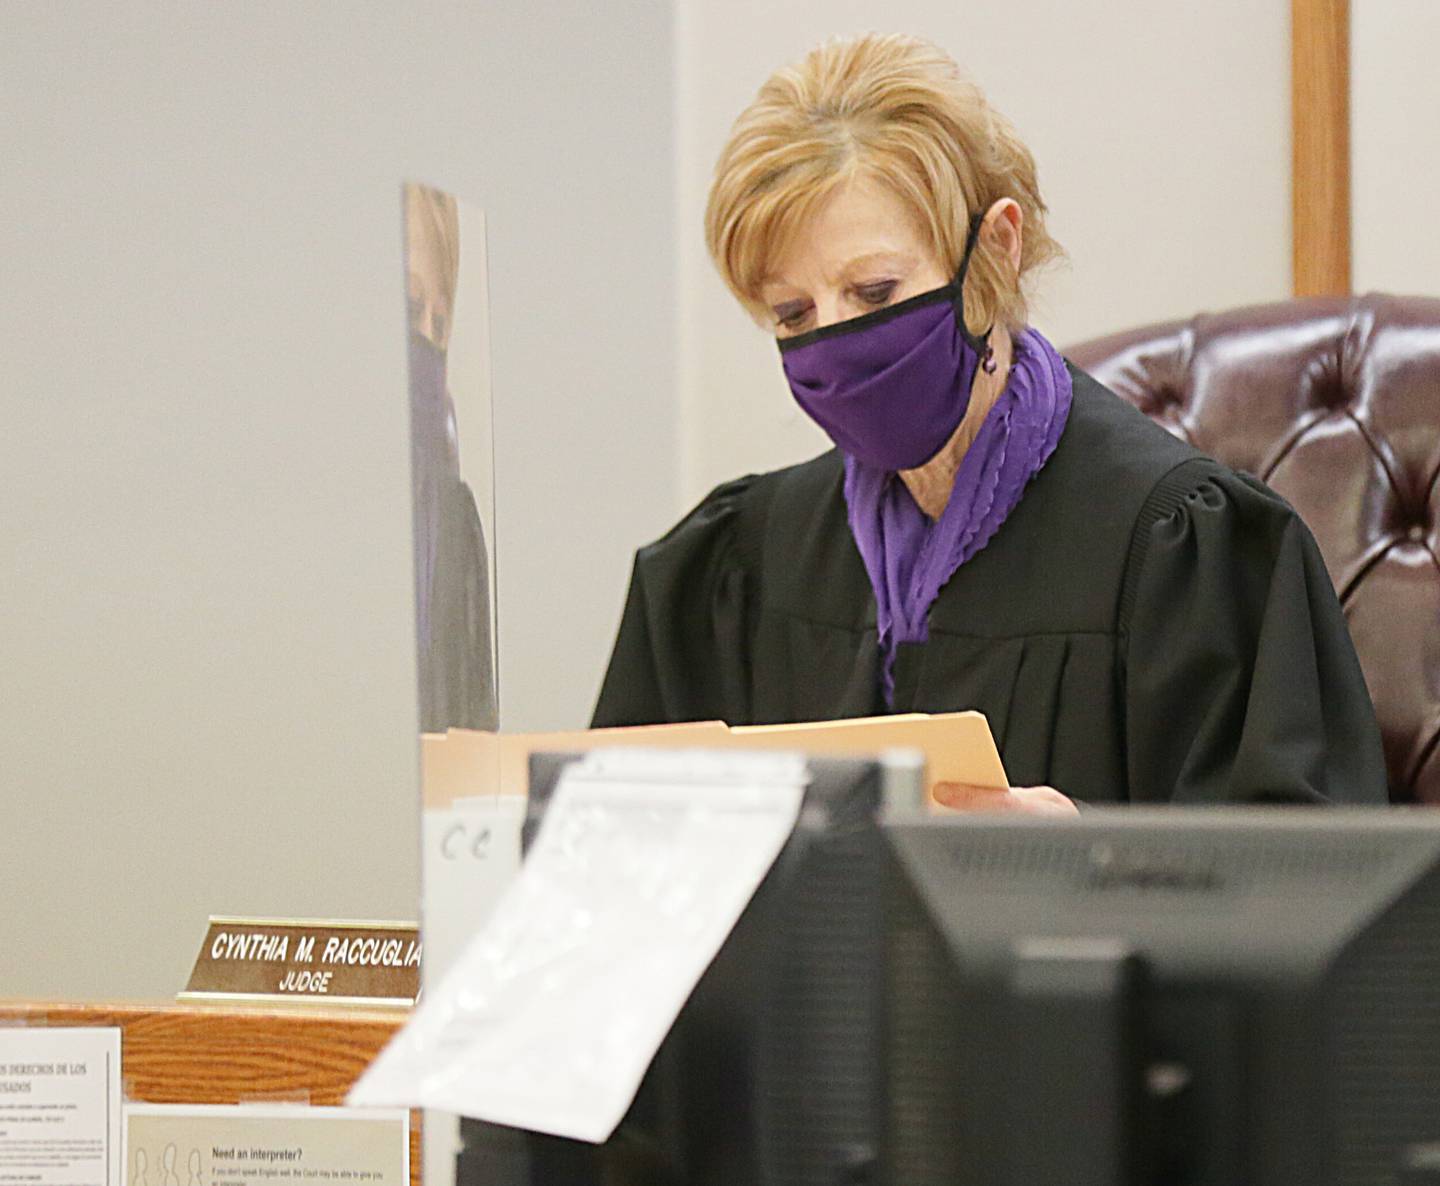 Judge Cynthia Raccuglia, reads the scheduled trial date for August 16, 2021 for Michael Swift, 29, of Mokena.  Swift has been charged with three counts for first degree murder in the stabbing death of his ex-girlfriend Grace Ann Taylor, age 21.